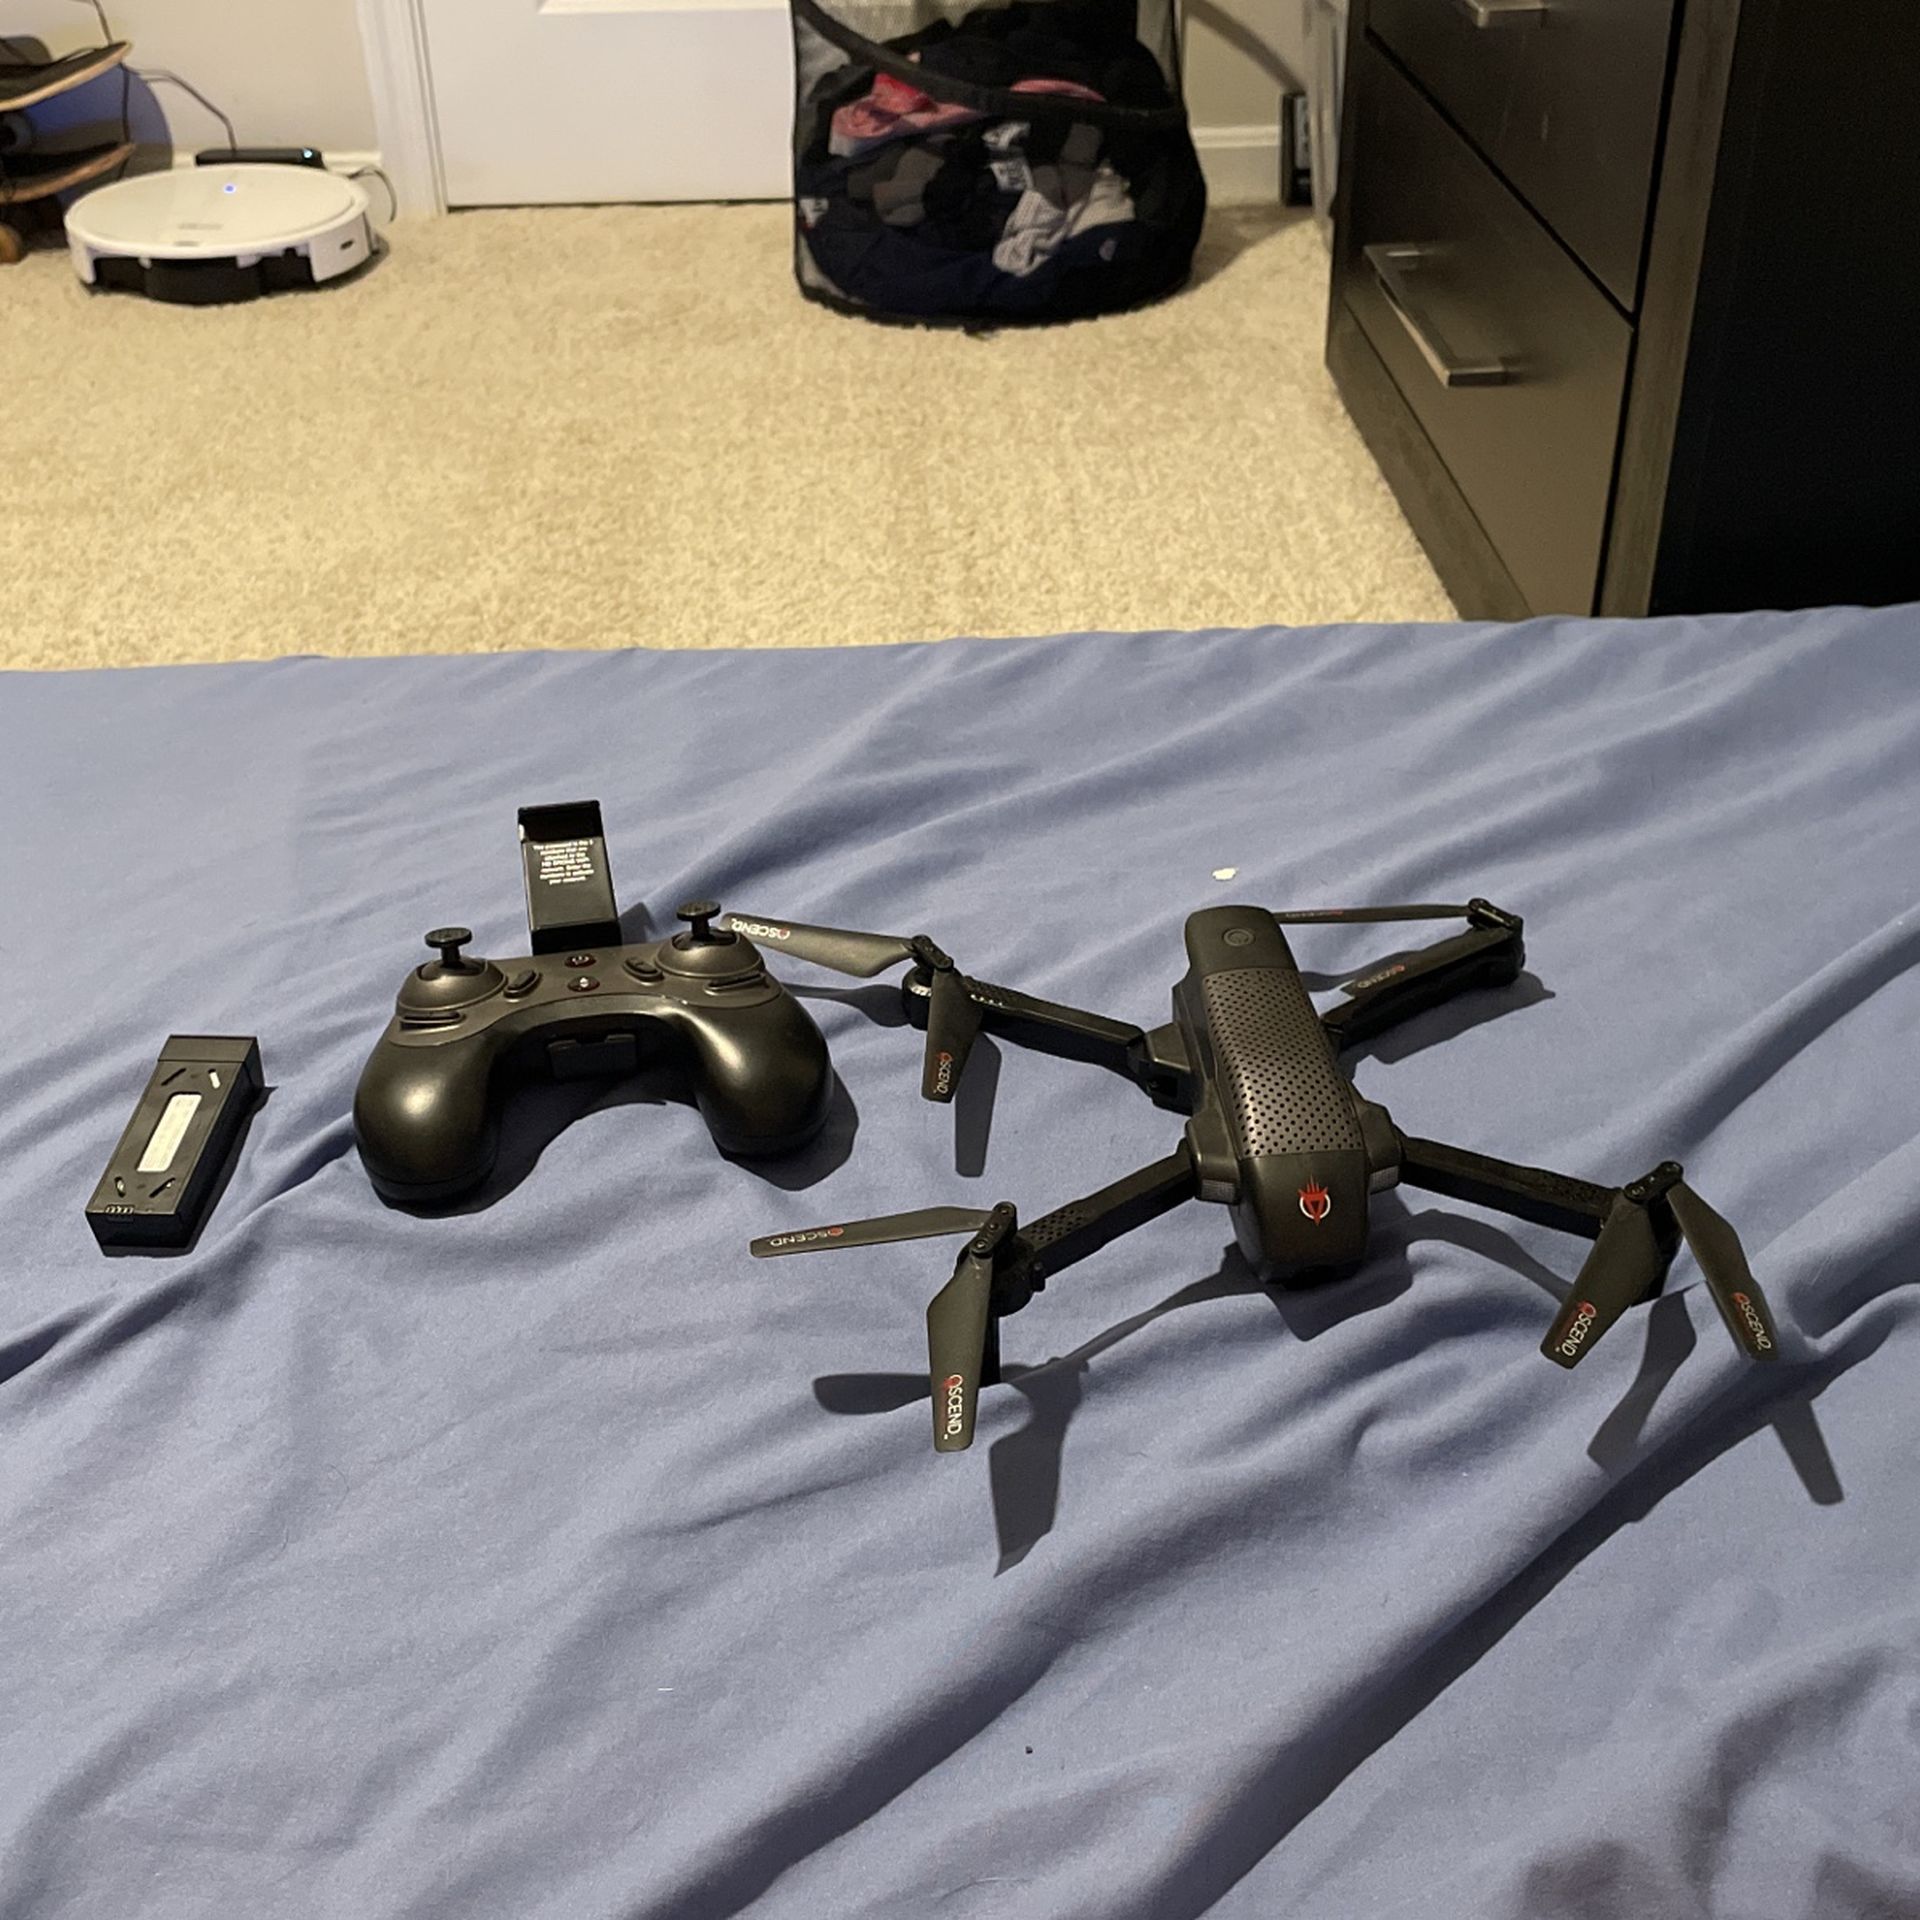 Brand New Drone Used Once 